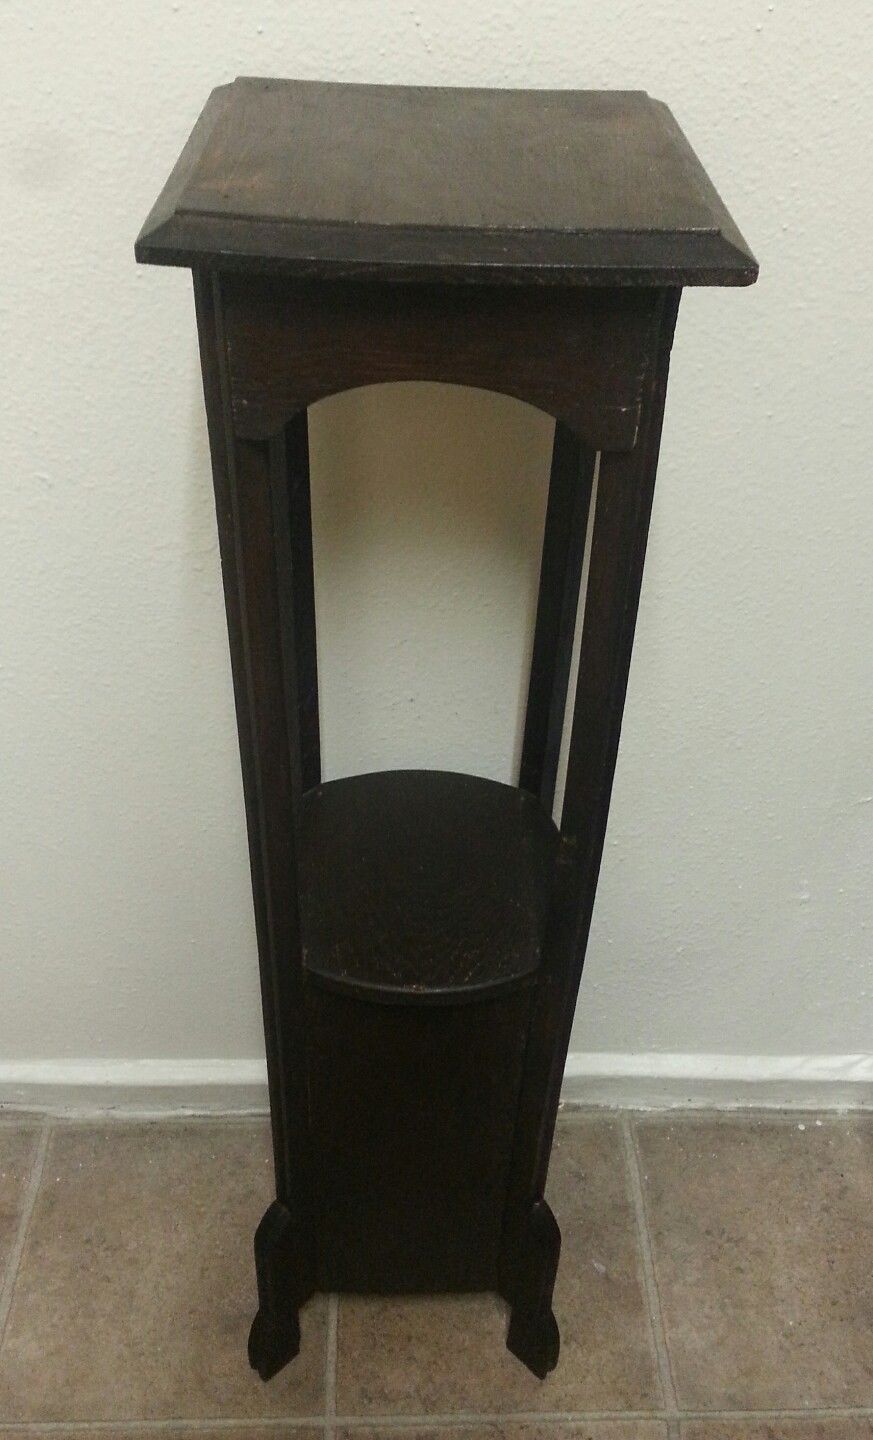 VINTAGE FRENCH WOOD TABLE PLANT STAND 40"